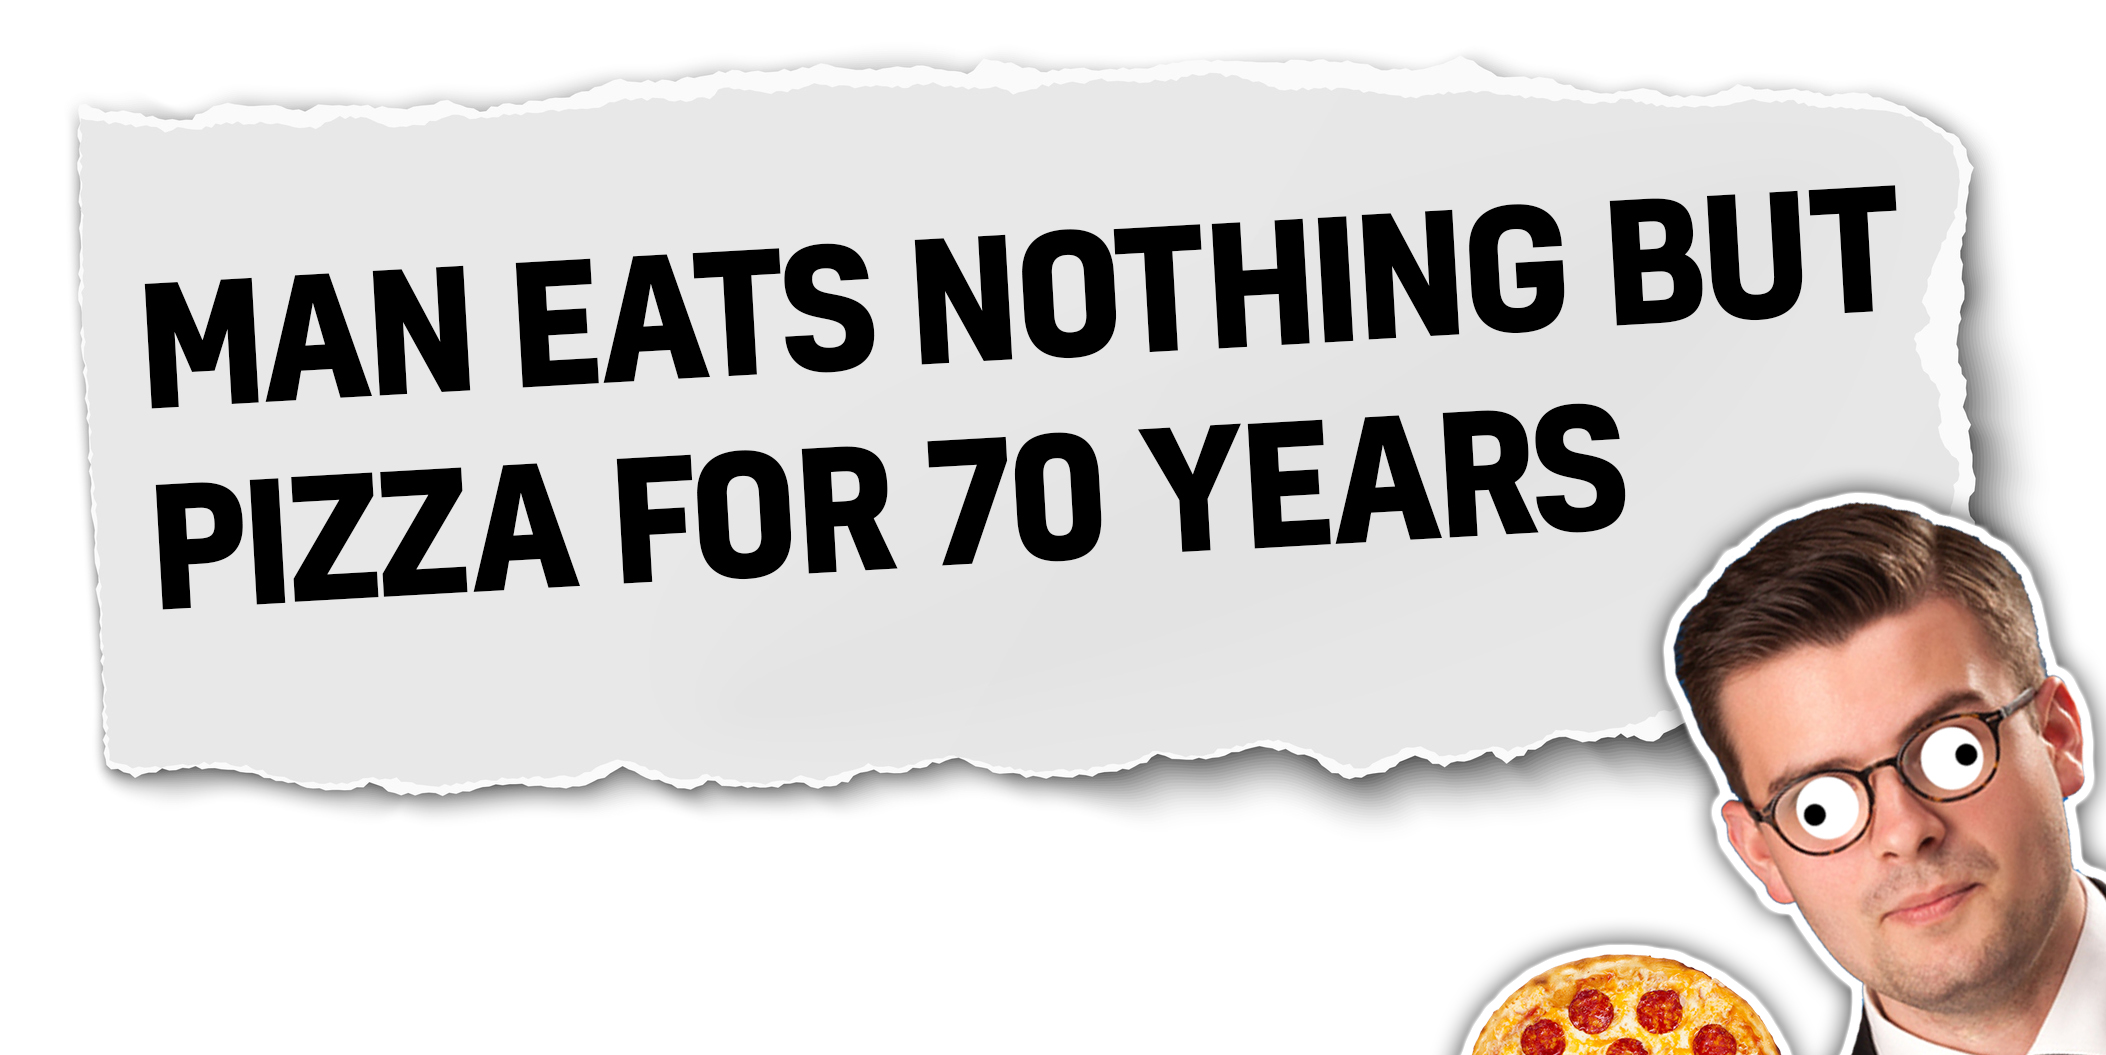 Man eats nothing but pizza for 70 years